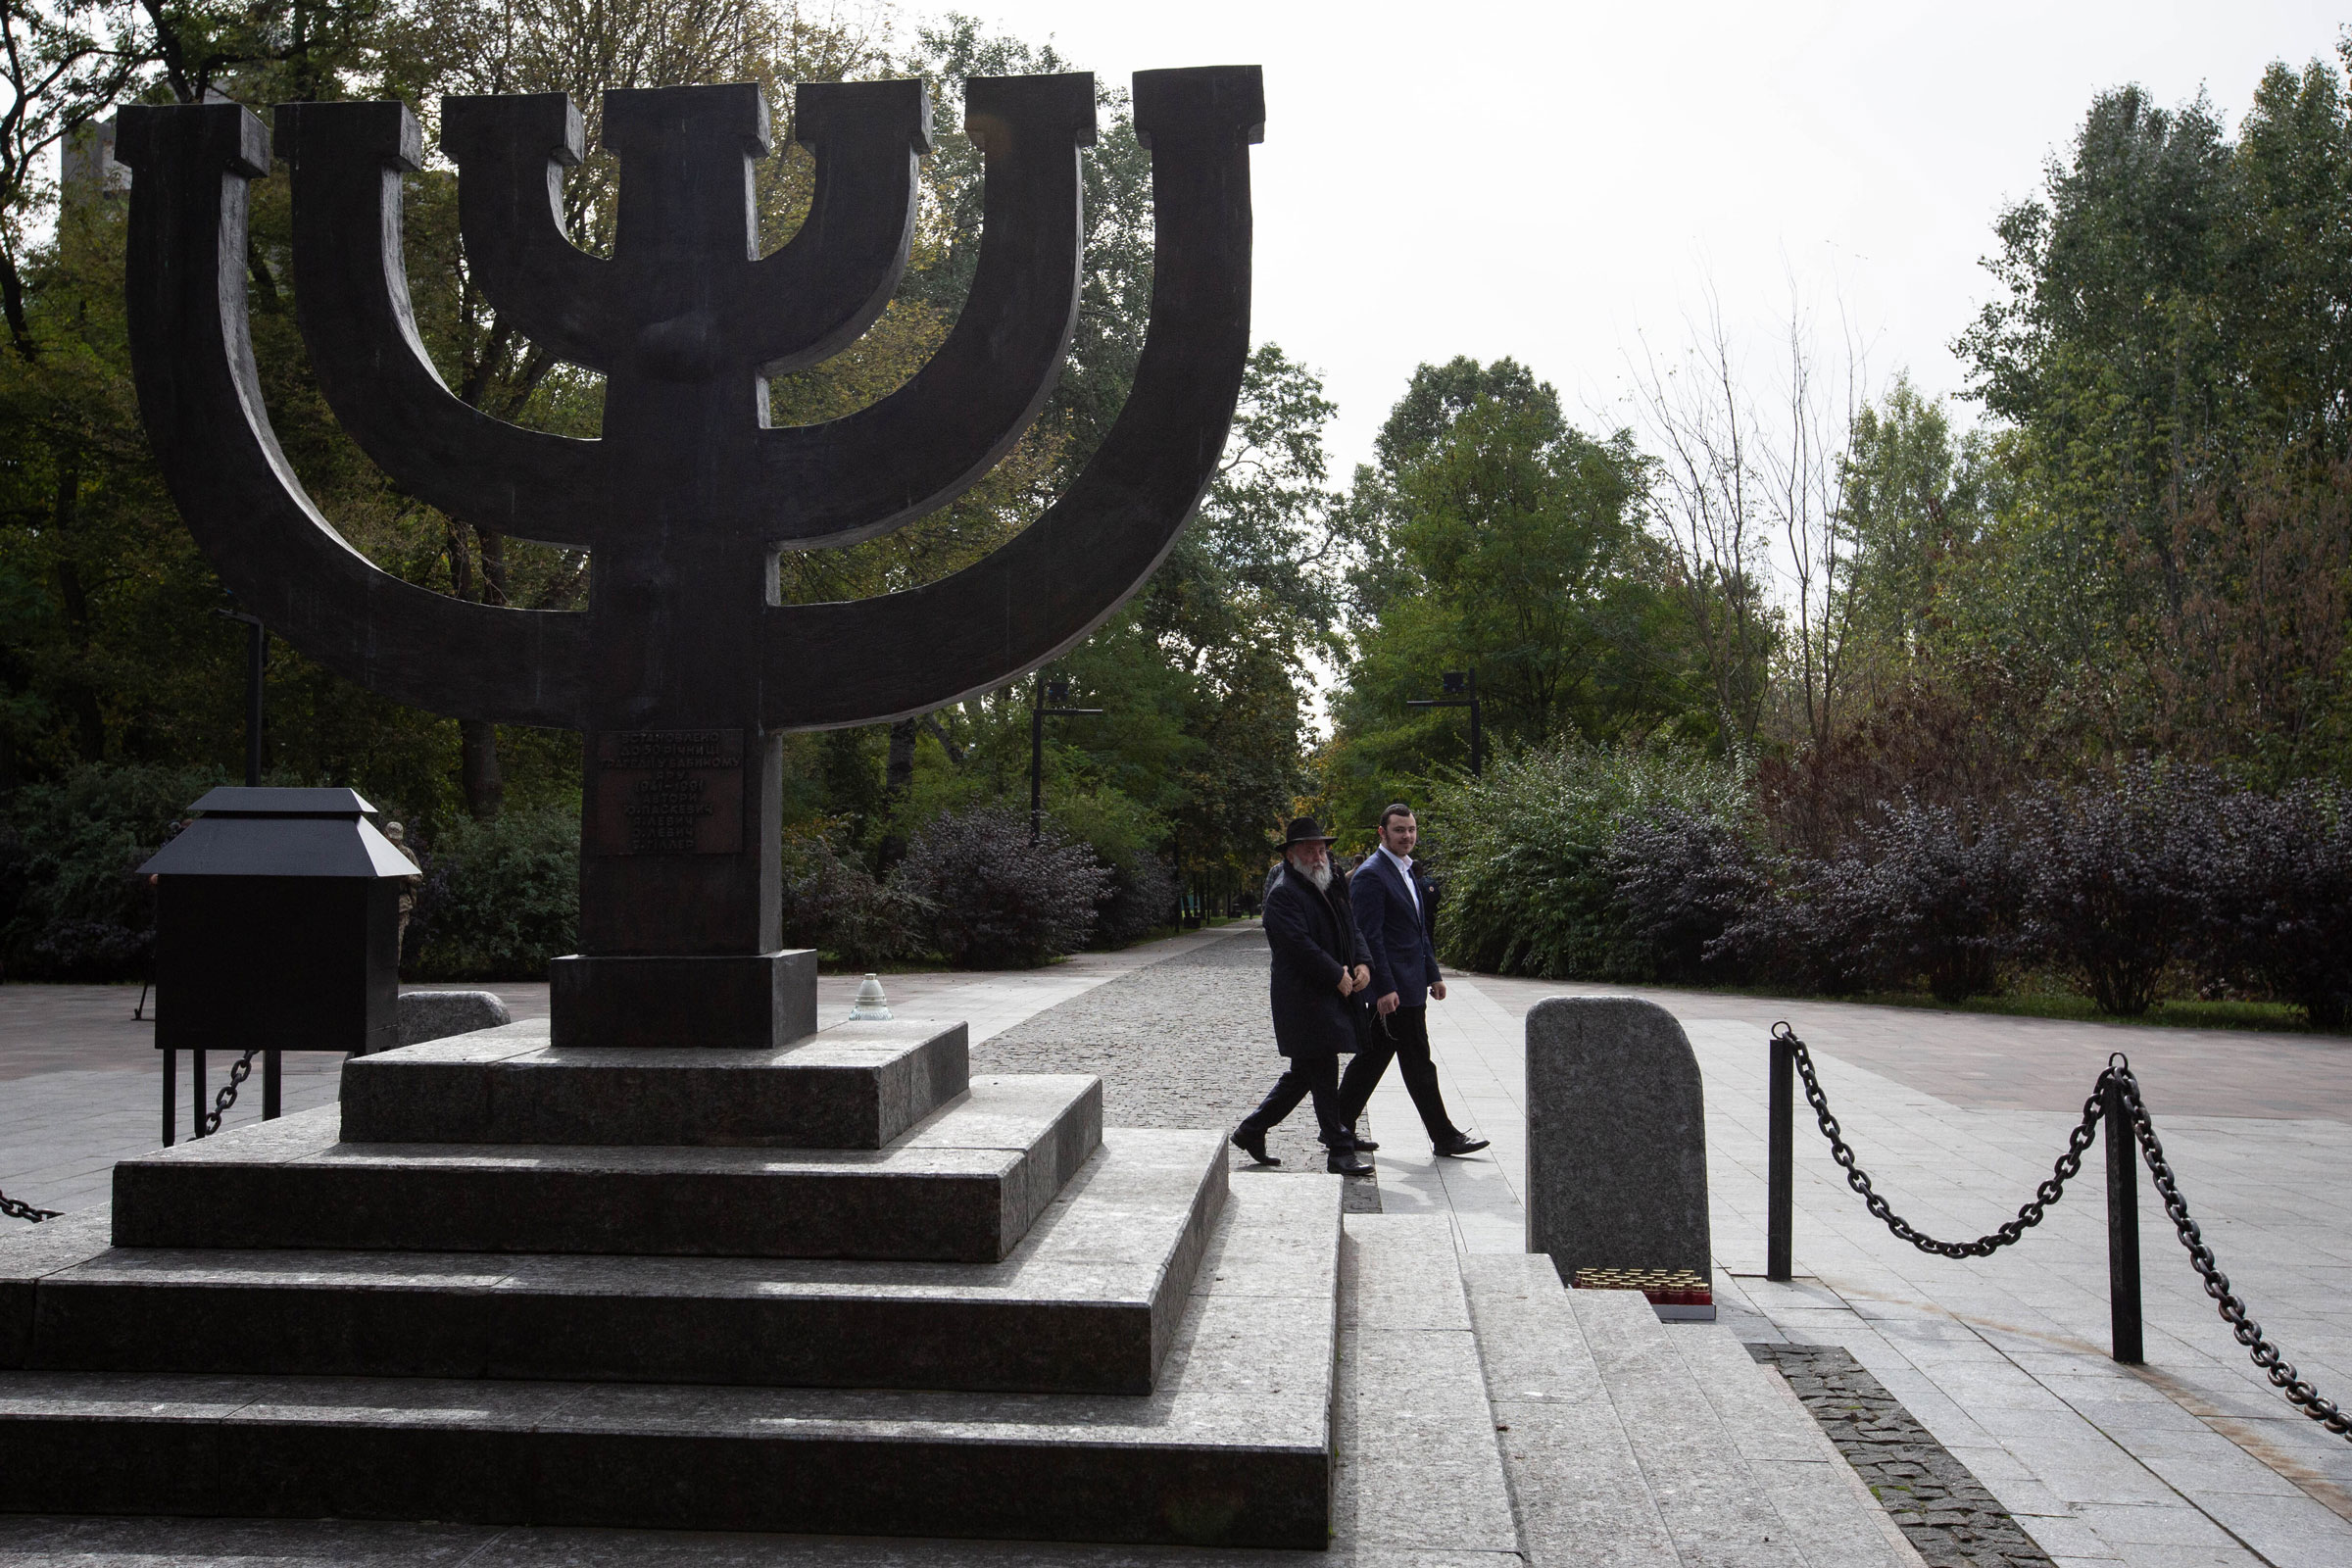 A rabbi walks past a monument commemorating the victims of Babyn Yar, one of the biggest single massacres of Jews during the Holocaust, in Kyiv on Sept. 29, 2022. (Oleksii Chumachenko—SOPA Images/LightRocket/Getty Images)